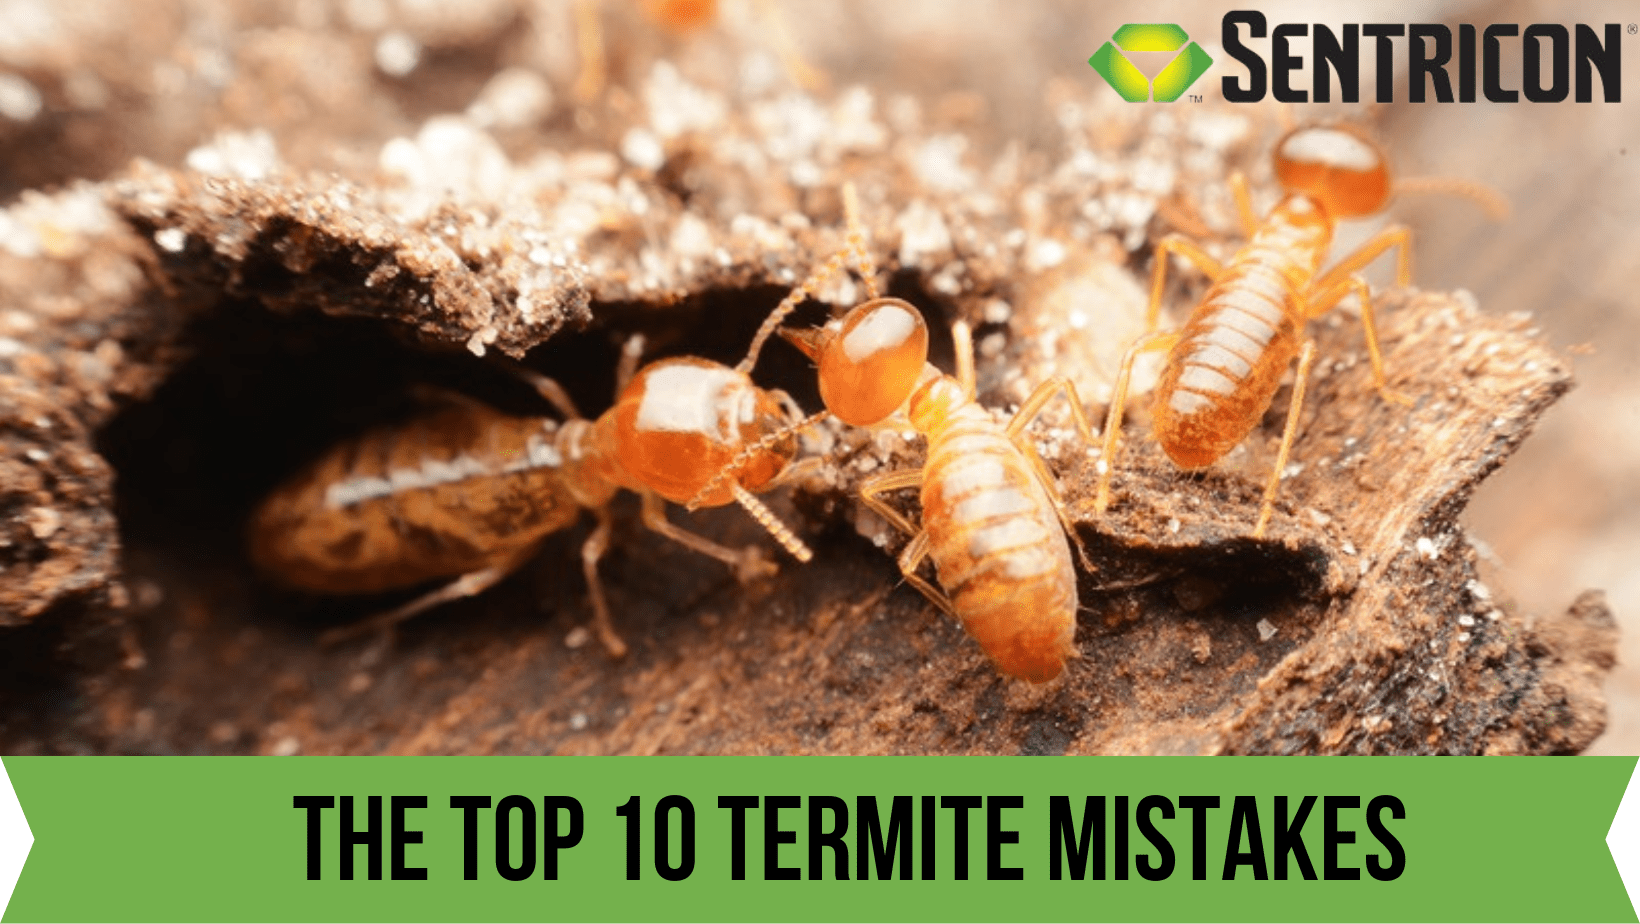 The Top 10 Termite Mistakes What homeowners do to invite termites